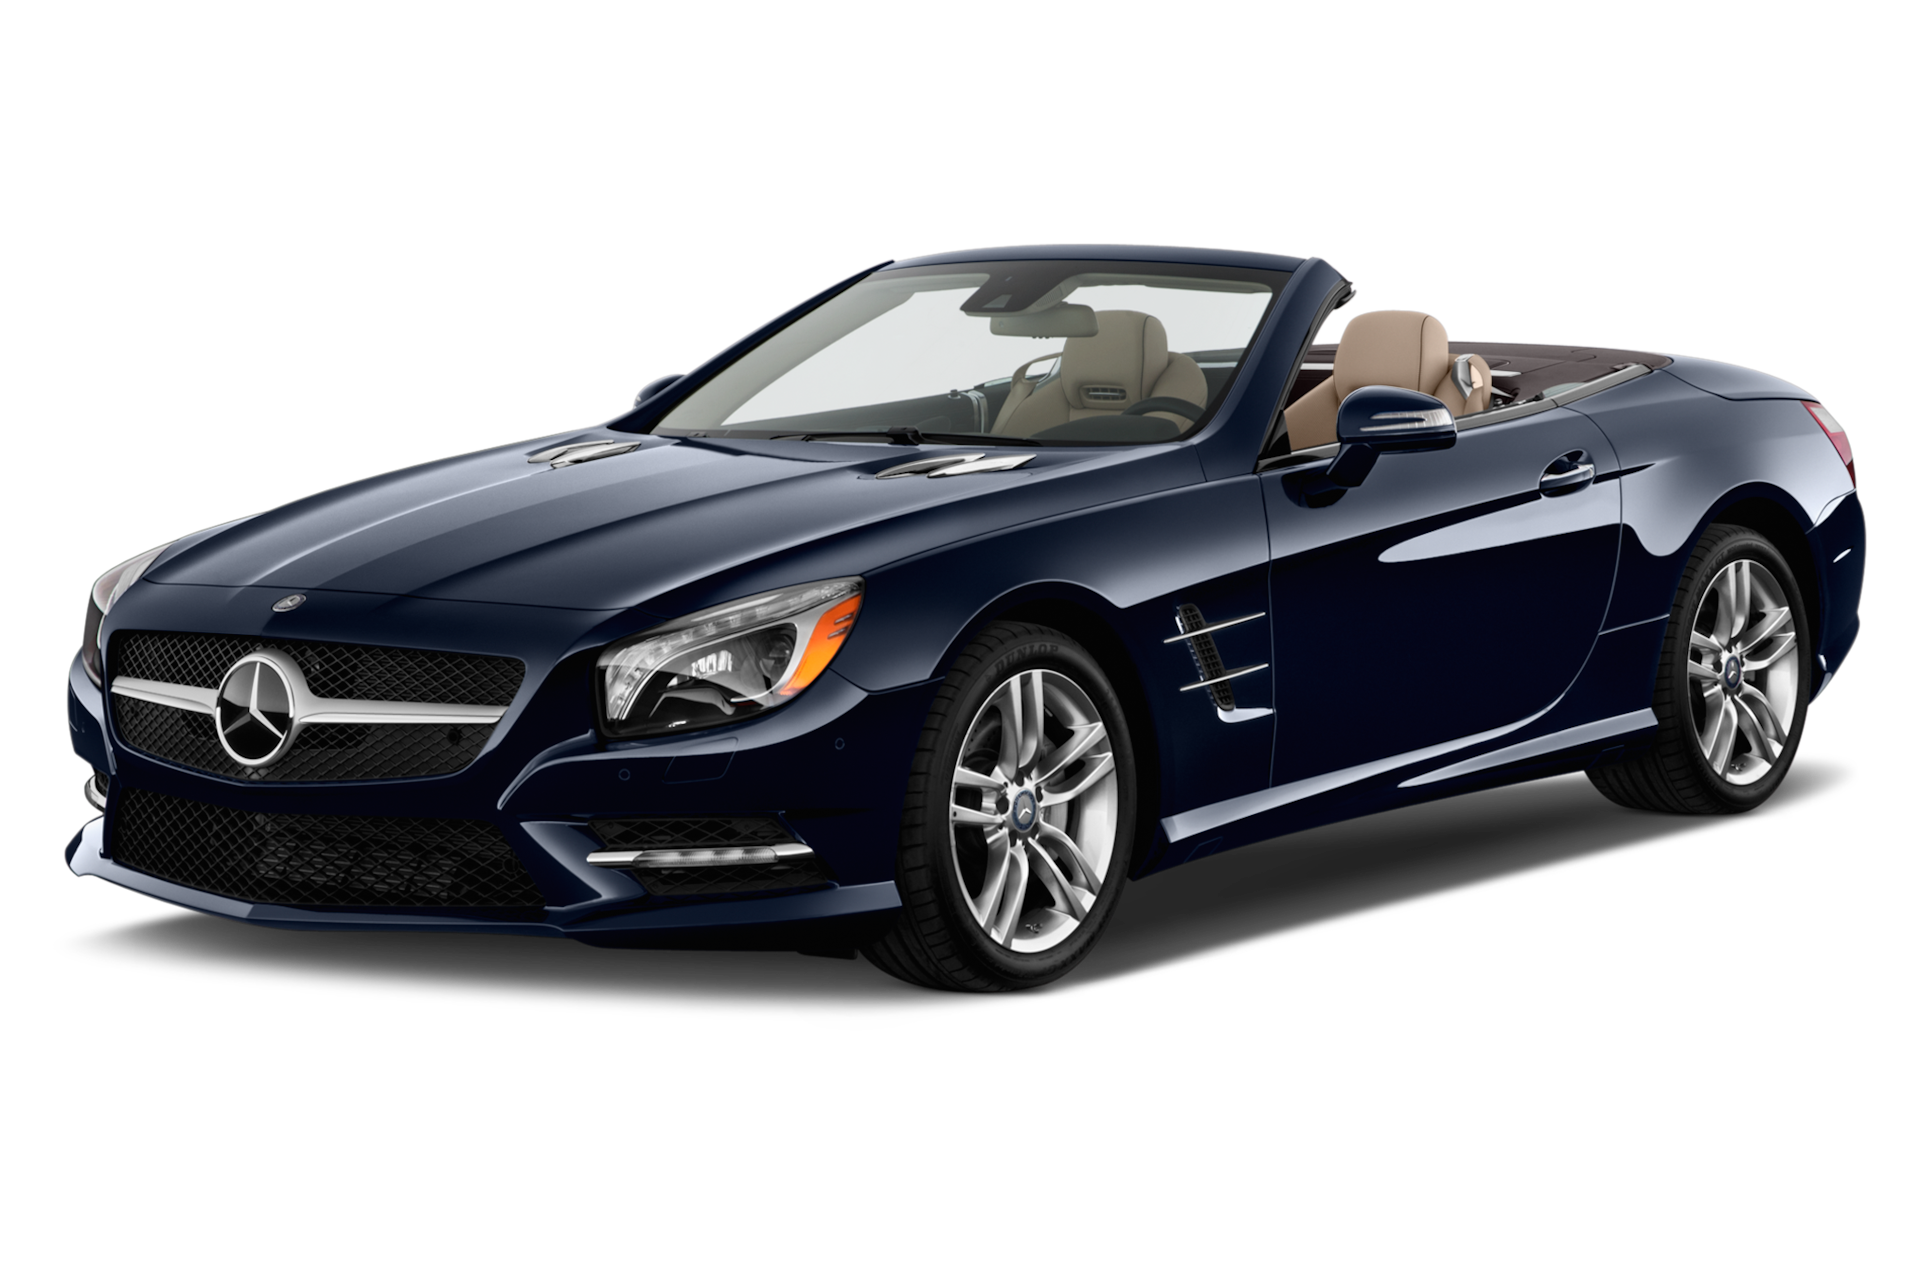 2016 Mercedes-Benz SL-Class Prices, Reviews, and Photos - MotorTrend